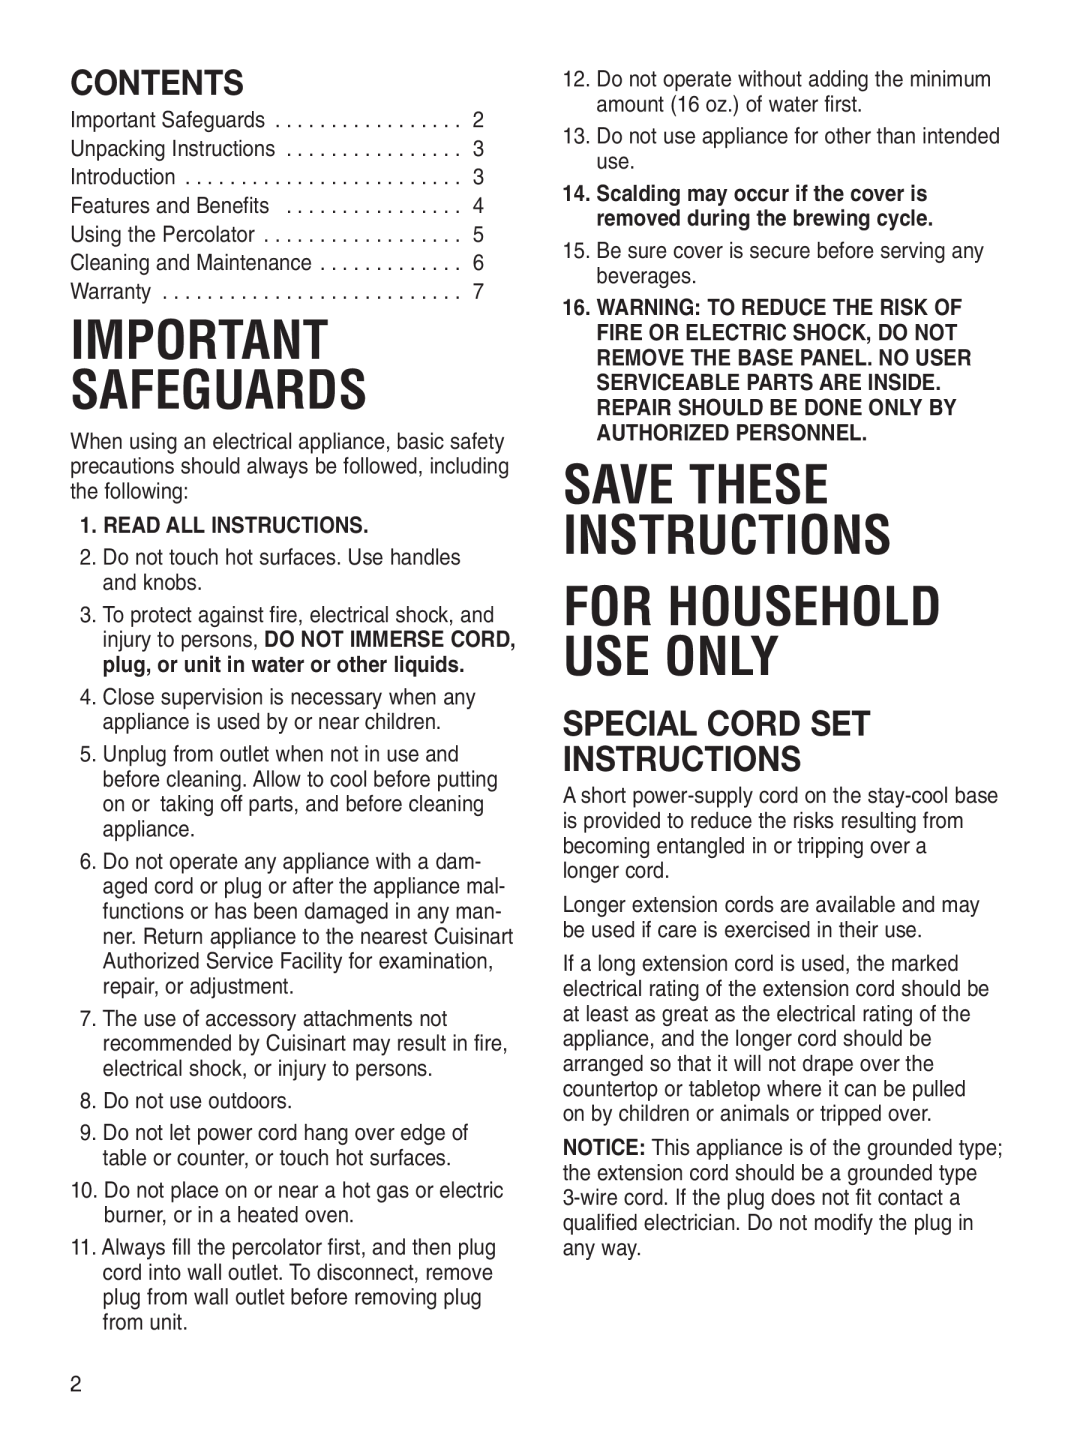 Cuisinart PRC-12 Series manual Save These Instructions, Contents, Special Cord Set Instructions, Safeguards 